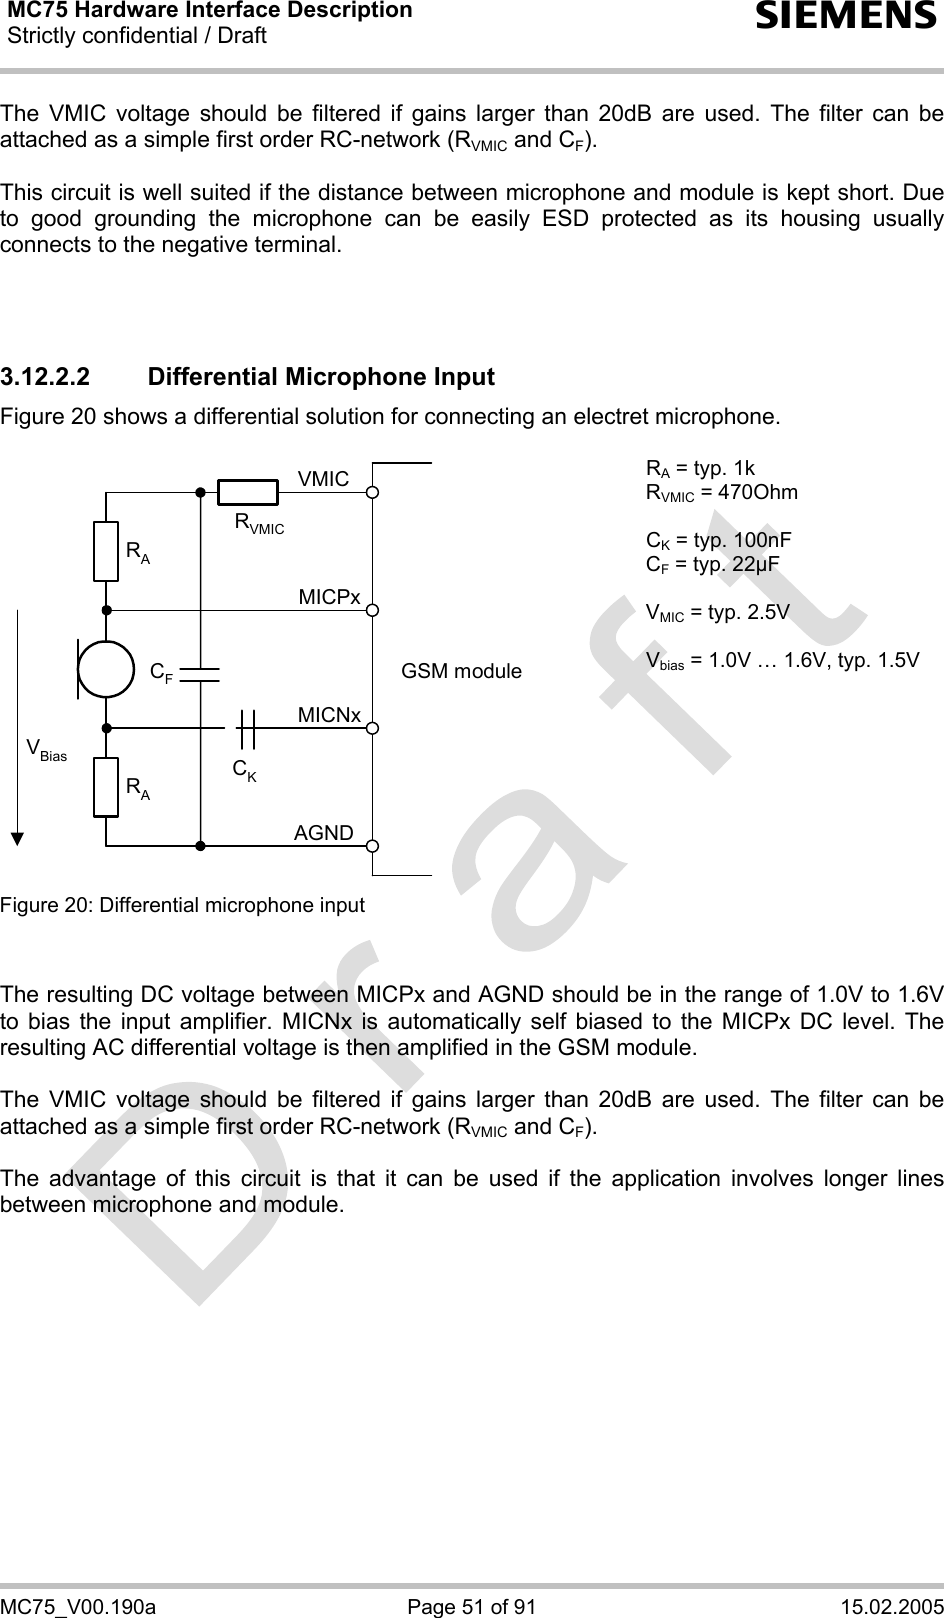 MC75 Hardware Interface Description Strictly confidential / Draft  s MC75_V00.190a  Page 51 of 91  15.02.2005 The VMIC voltage should be filtered if gains larger than 20dB are used. The filter can be attached as a simple first order RC-network (RVMIC and CF).  This circuit is well suited if the distance between microphone and module is kept short. Due to good grounding the microphone can be easily ESD protected as its housing usually connects to the negative terminal.     3.12.2.2  Differential Microphone Input Figure 20 shows a differential solution for connecting an electret microphone.   GSM moduleRARAVBiasCKAGNDMICNxMICPxVMICCFRVMIC RA = typ. 1k RVMIC = 470Ohm  CK = typ. 100nF CF = typ. 22µF  VMIC = typ. 2.5V  Vbias = 1.0V … 1.6V, typ. 1.5V Figure 20: Differential microphone input     The resulting DC voltage between MICPx and AGND should be in the range of 1.0V to 1.6V to bias the input amplifier. MICNx is automatically self biased to the MICPx DC level. The resulting AC differential voltage is then amplified in the GSM module.   The VMIC voltage should be filtered if gains larger than 20dB are used. The filter can be attached as a simple first order RC-network (RVMIC and CF).  The advantage of this circuit is that it can be used if the application involves longer lines between microphone and module. 